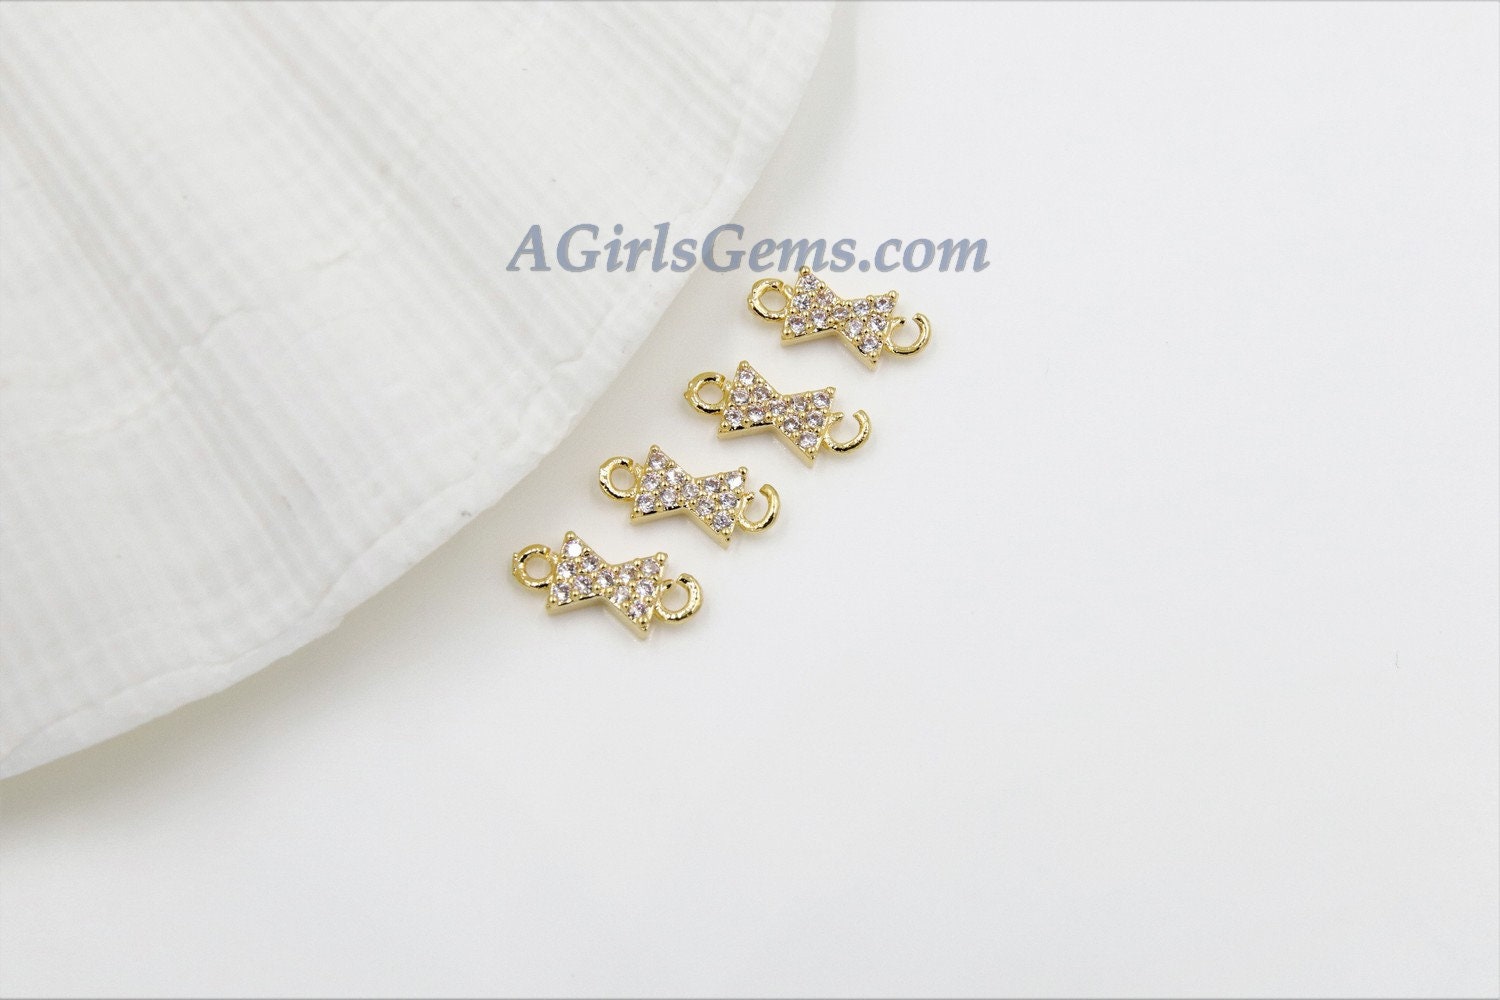 CZ Micro Pave Bow Tie Connector #26, Tiny Hourglass Charm 18 k Gold Plated 4 x 10 mm Ribbon Connector, Tiny CZ Charms for Jewelry Making